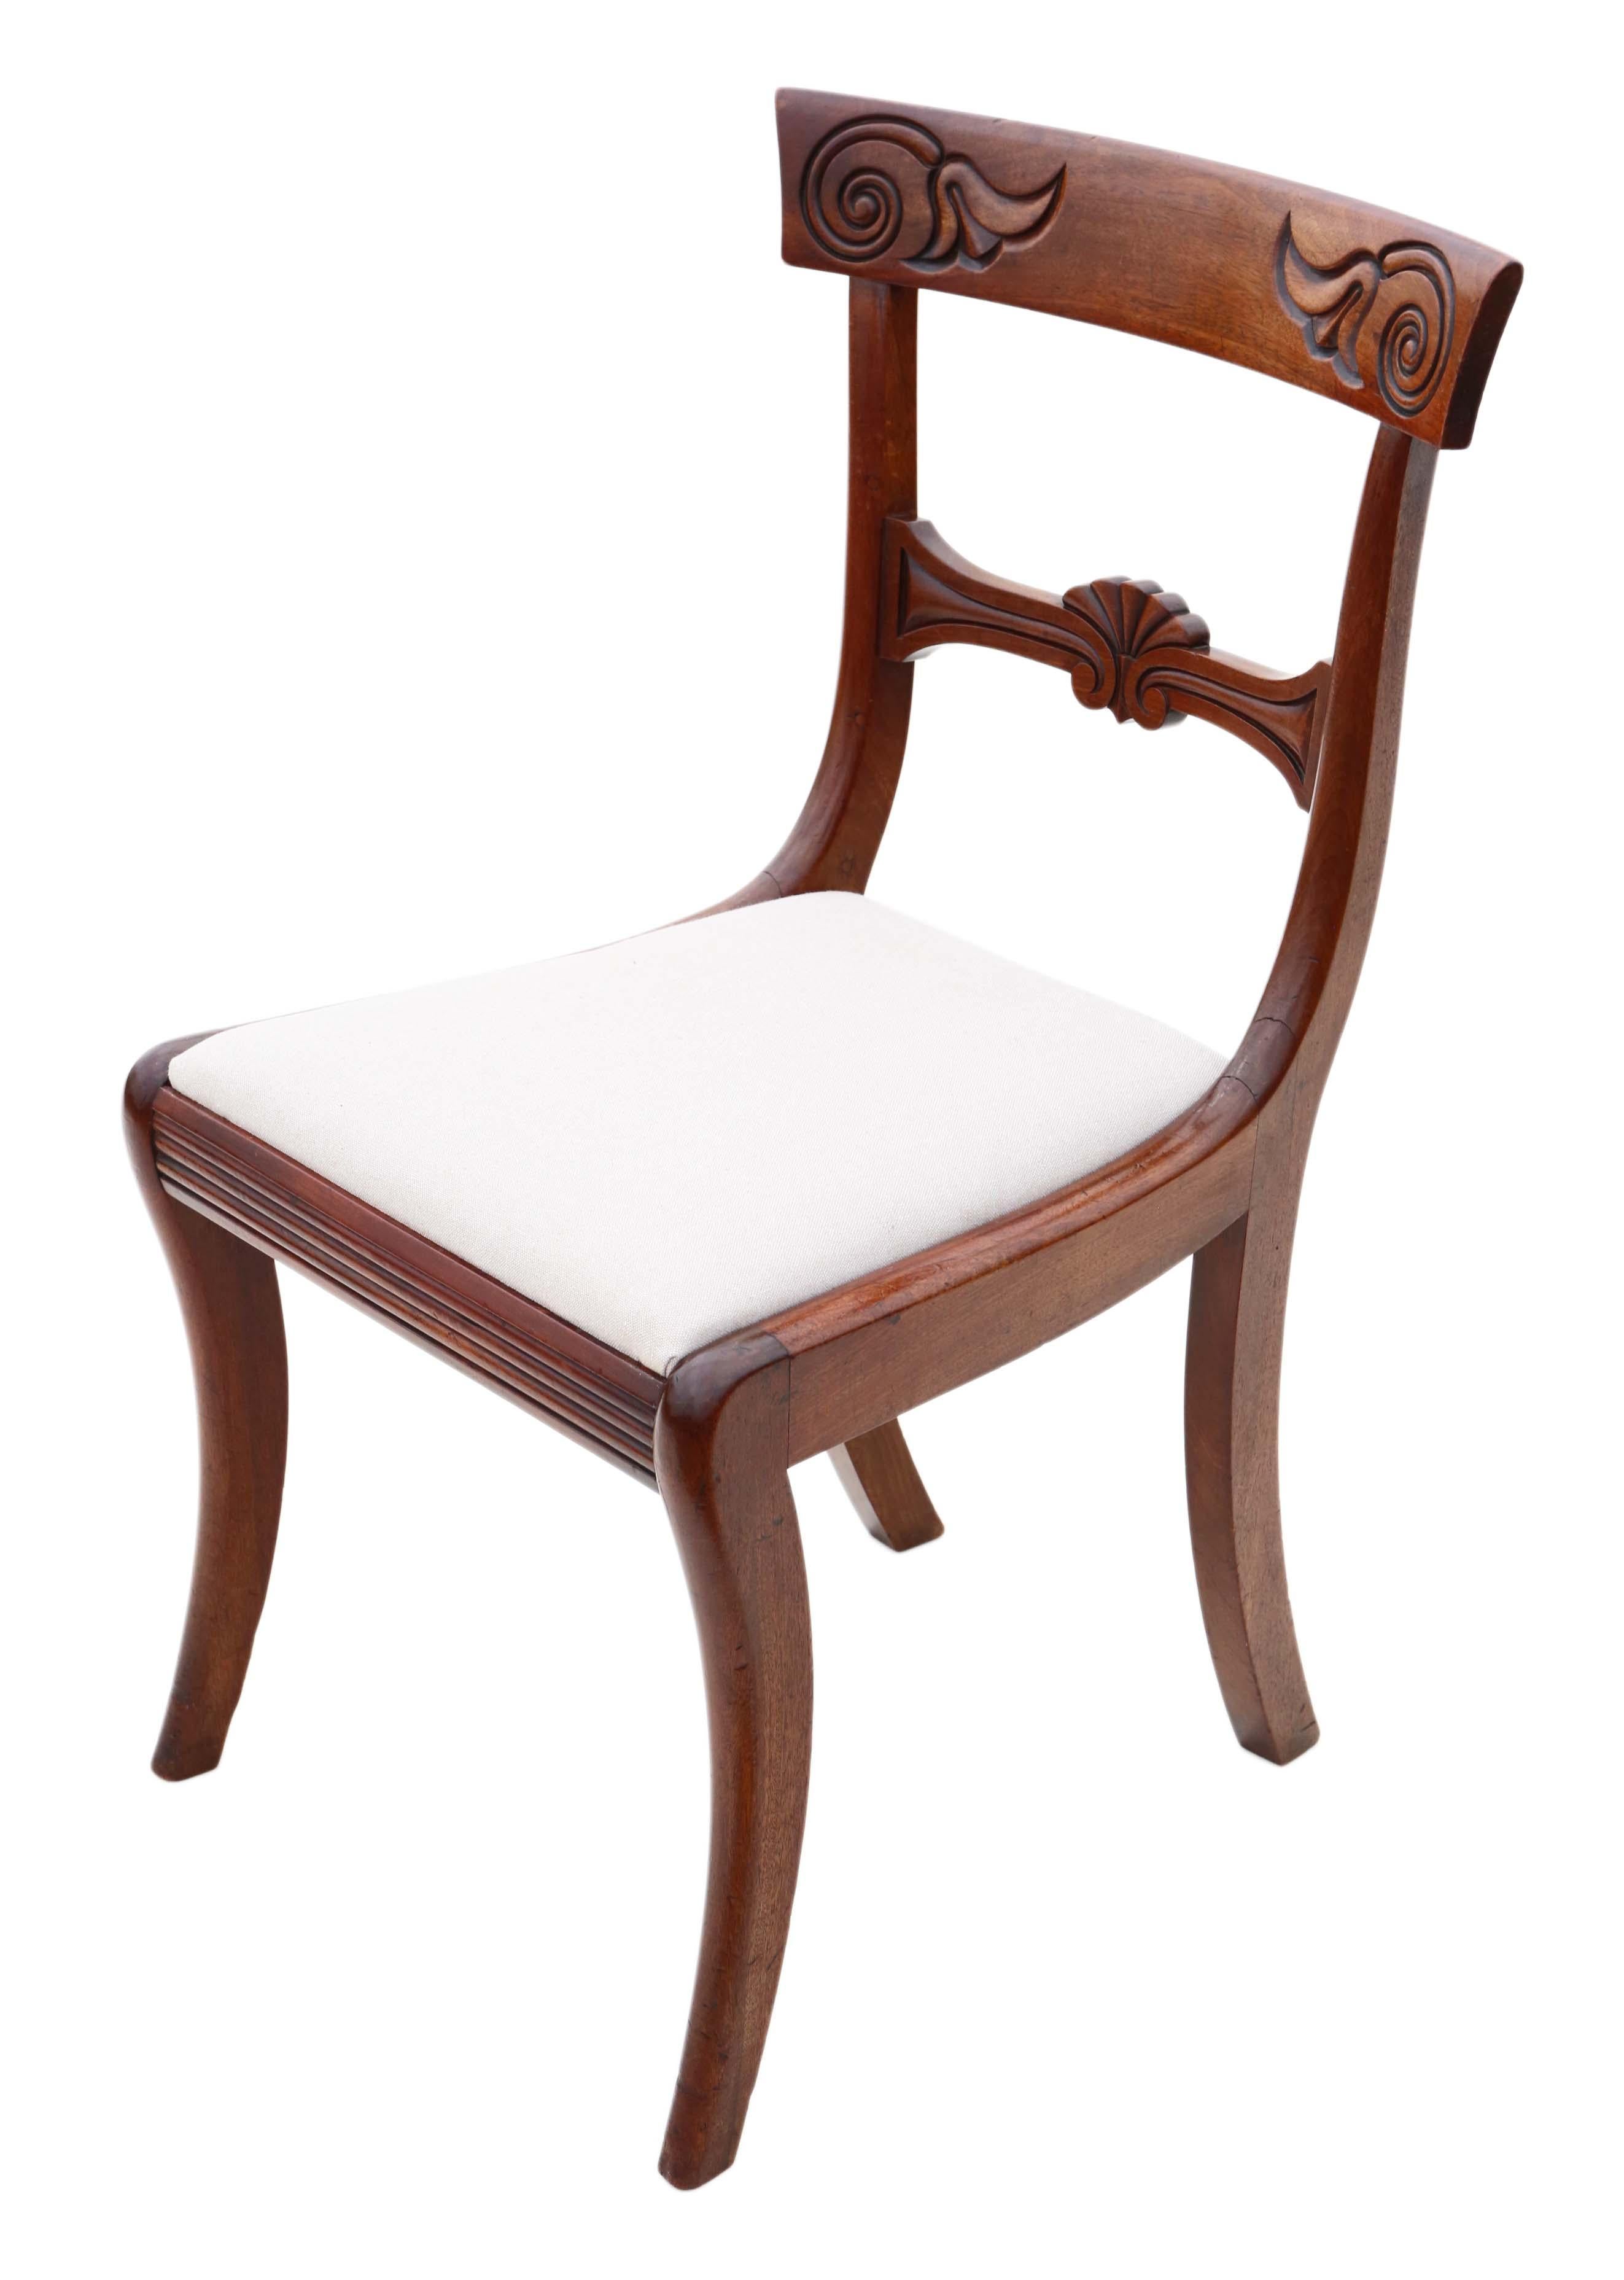 Regency Cuban Mahogany Dining Chairs: Set of 6 (4+2), Antique Quality, C1825 For Sale 7